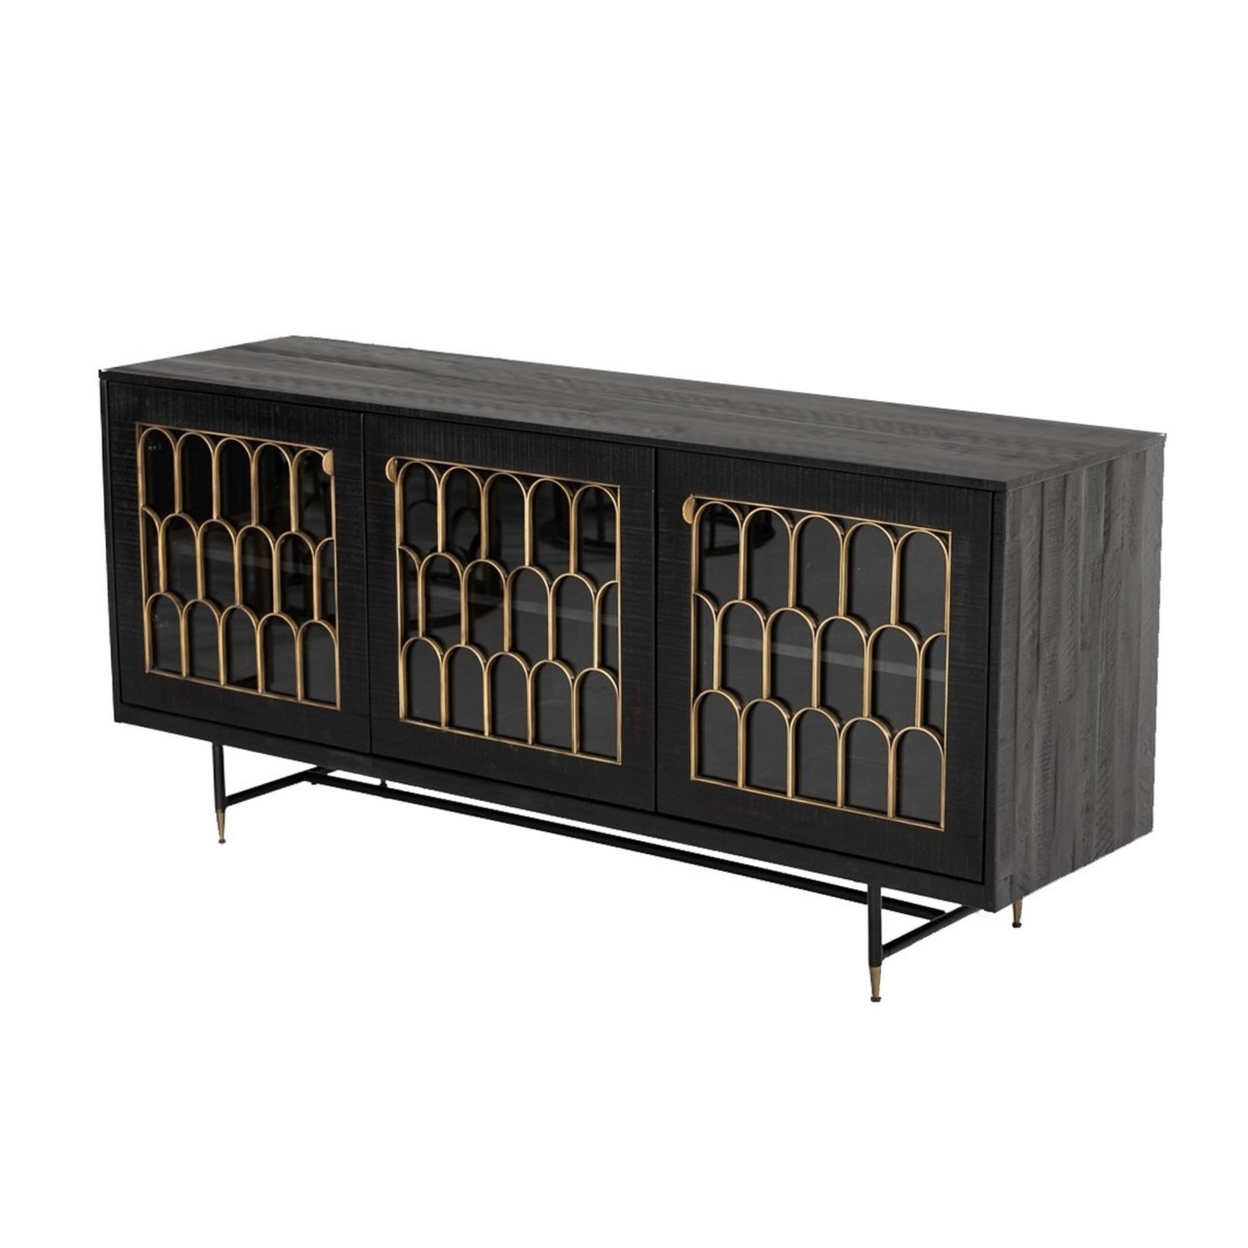 3 Door Storage Buffet With Glass Front And Arch Design, Black And Brass- Saltoro Sherpi